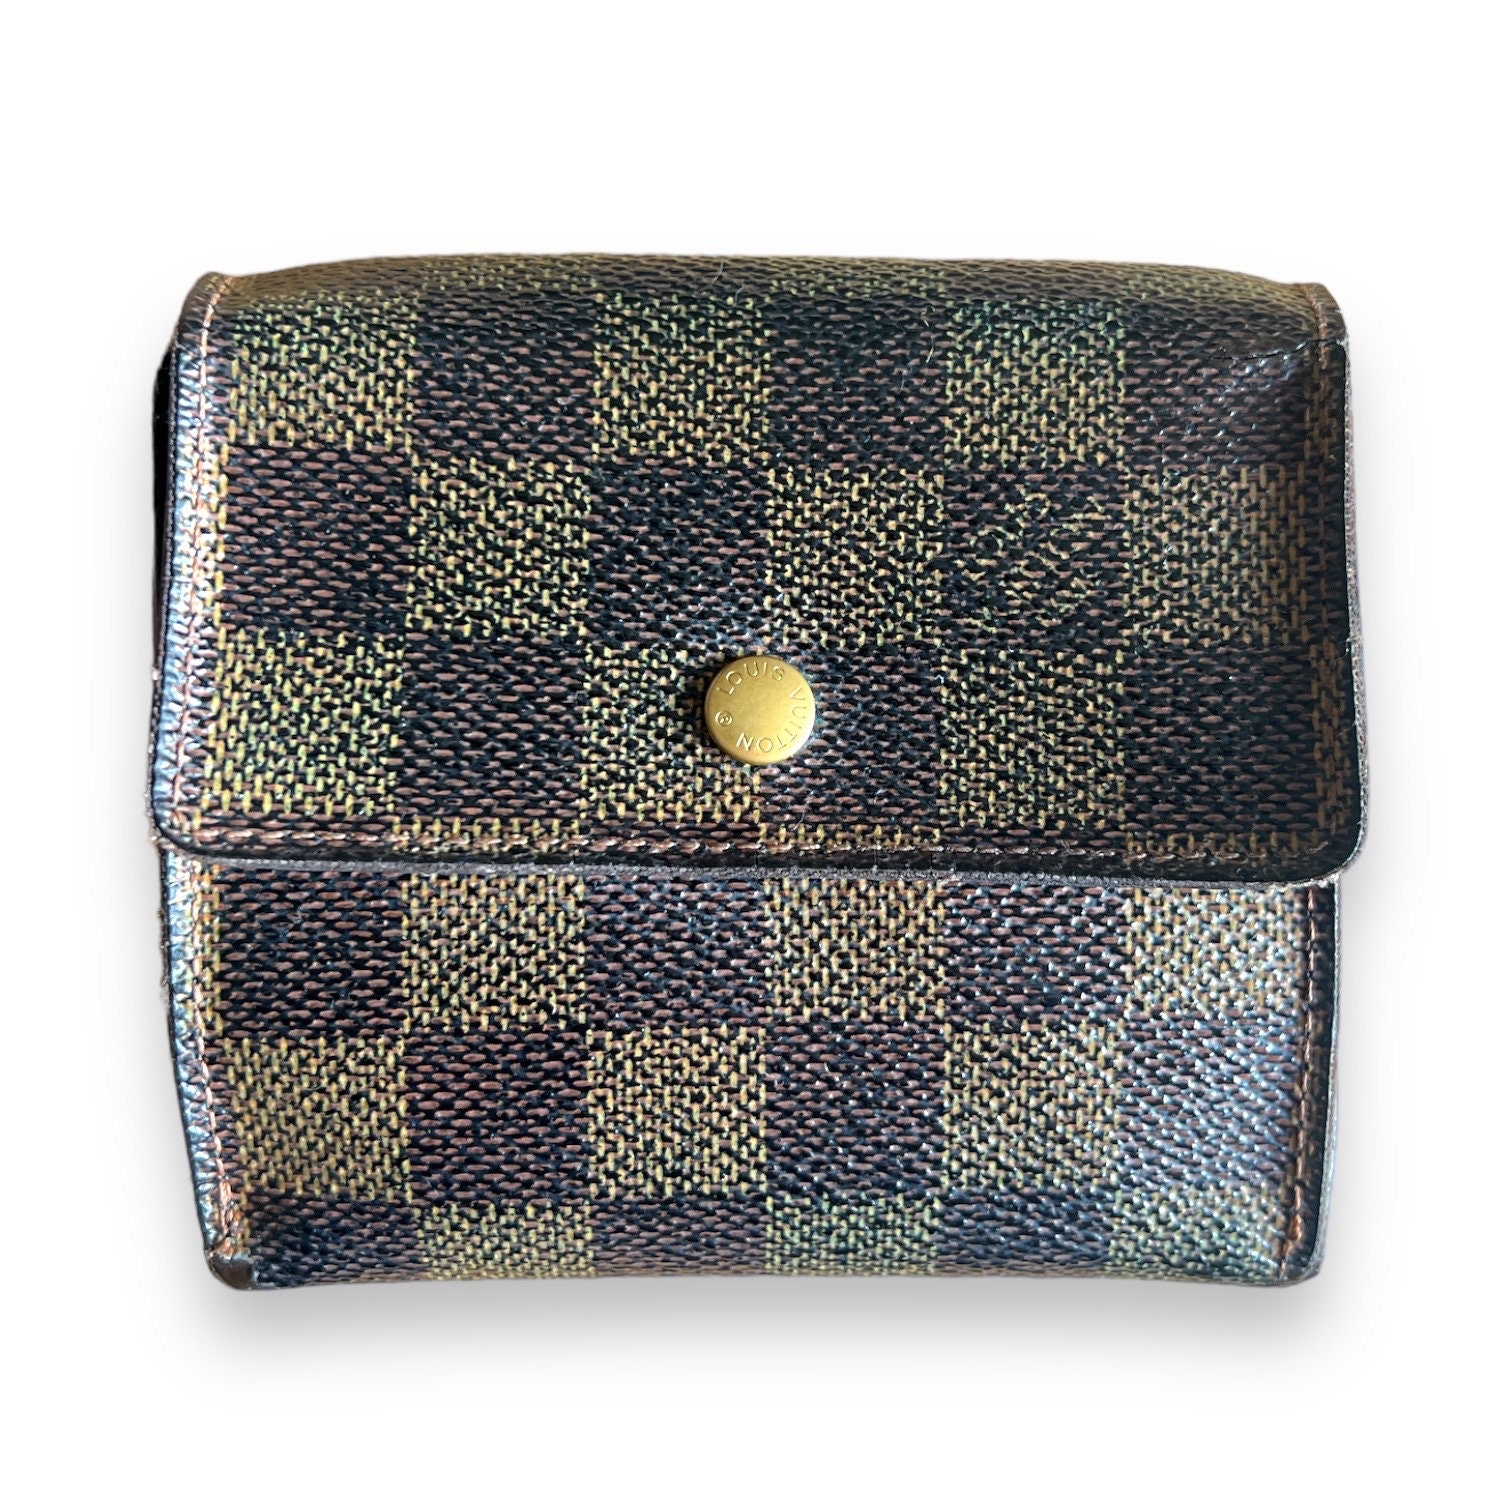 Buy Small Louis Vuitton Purse Online In India -  India